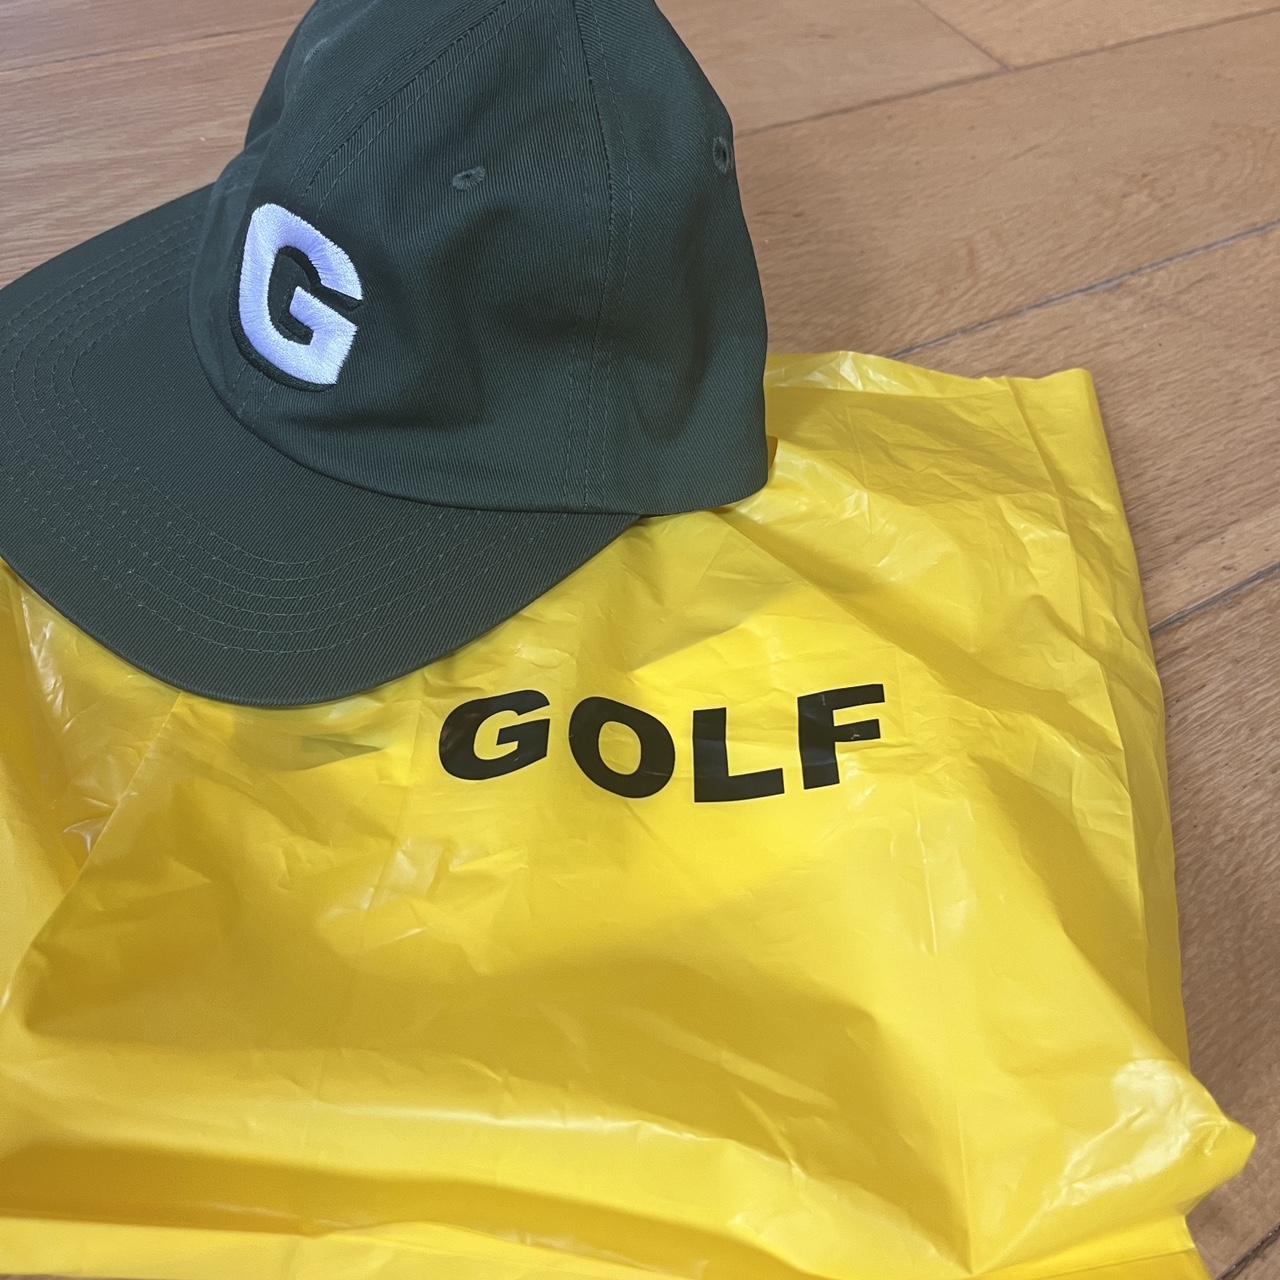 Green Golf Wang G hat with leather strap for... - Depop